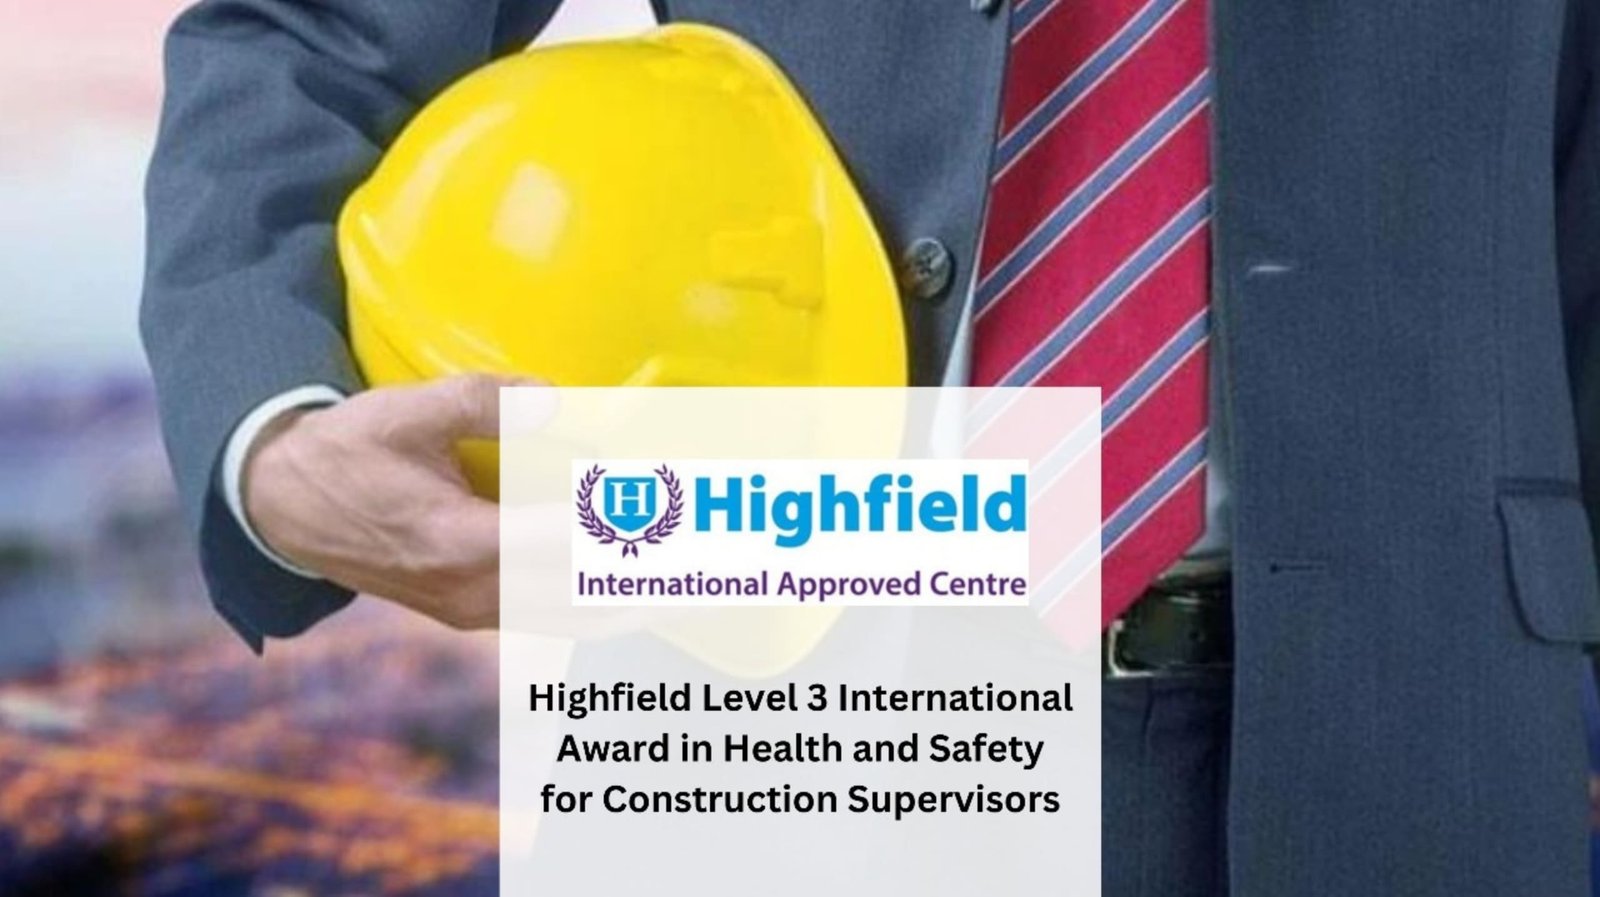 Highfield Level 3 International Award in Health and Safety for Construction Supervisors